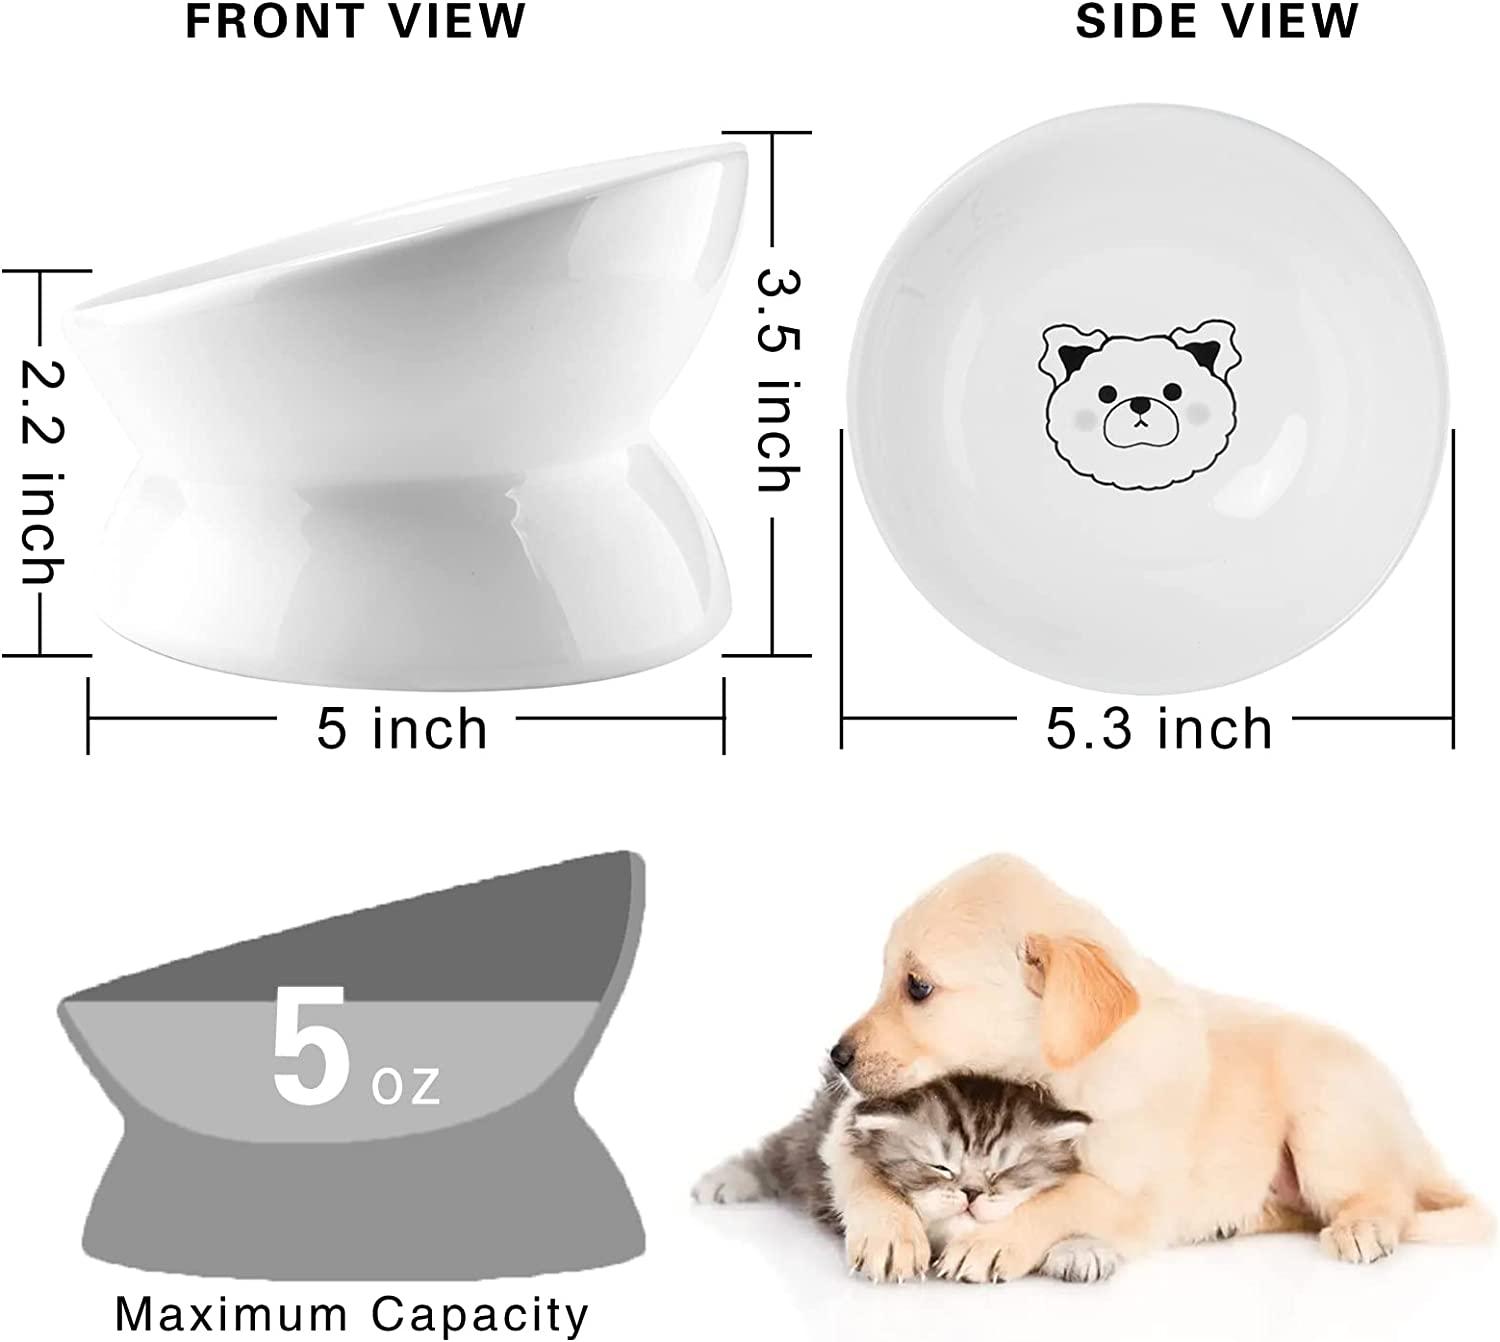 Dog and cat Bowl, side by side